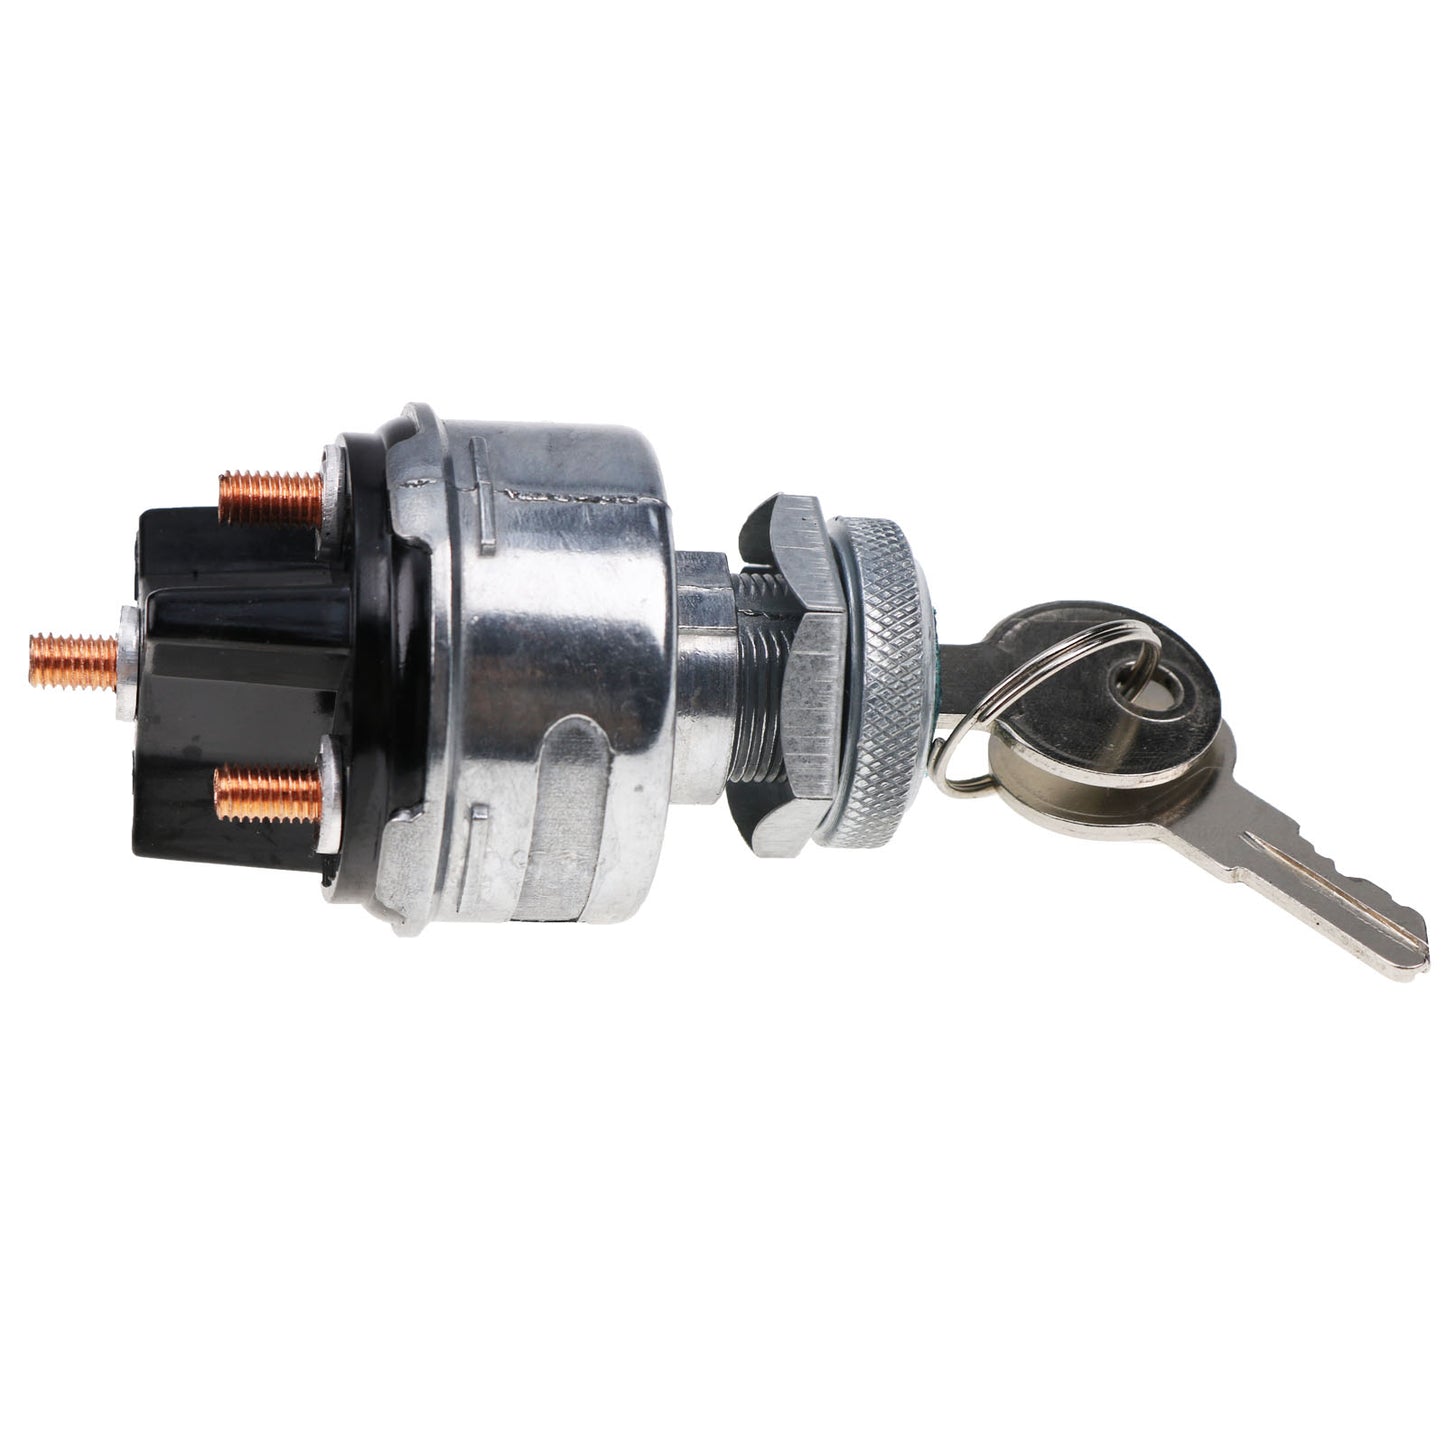 New 641833 Ignition Switch Compatible with New Holland LS160 LS170 LS180 LS190 L190 LS150 LS140 L150 L160 L170 L180 L175 L785 L865 L783 L185 L565 LX485 LX565 LX665 LX885 LX865 C185 C190 C175